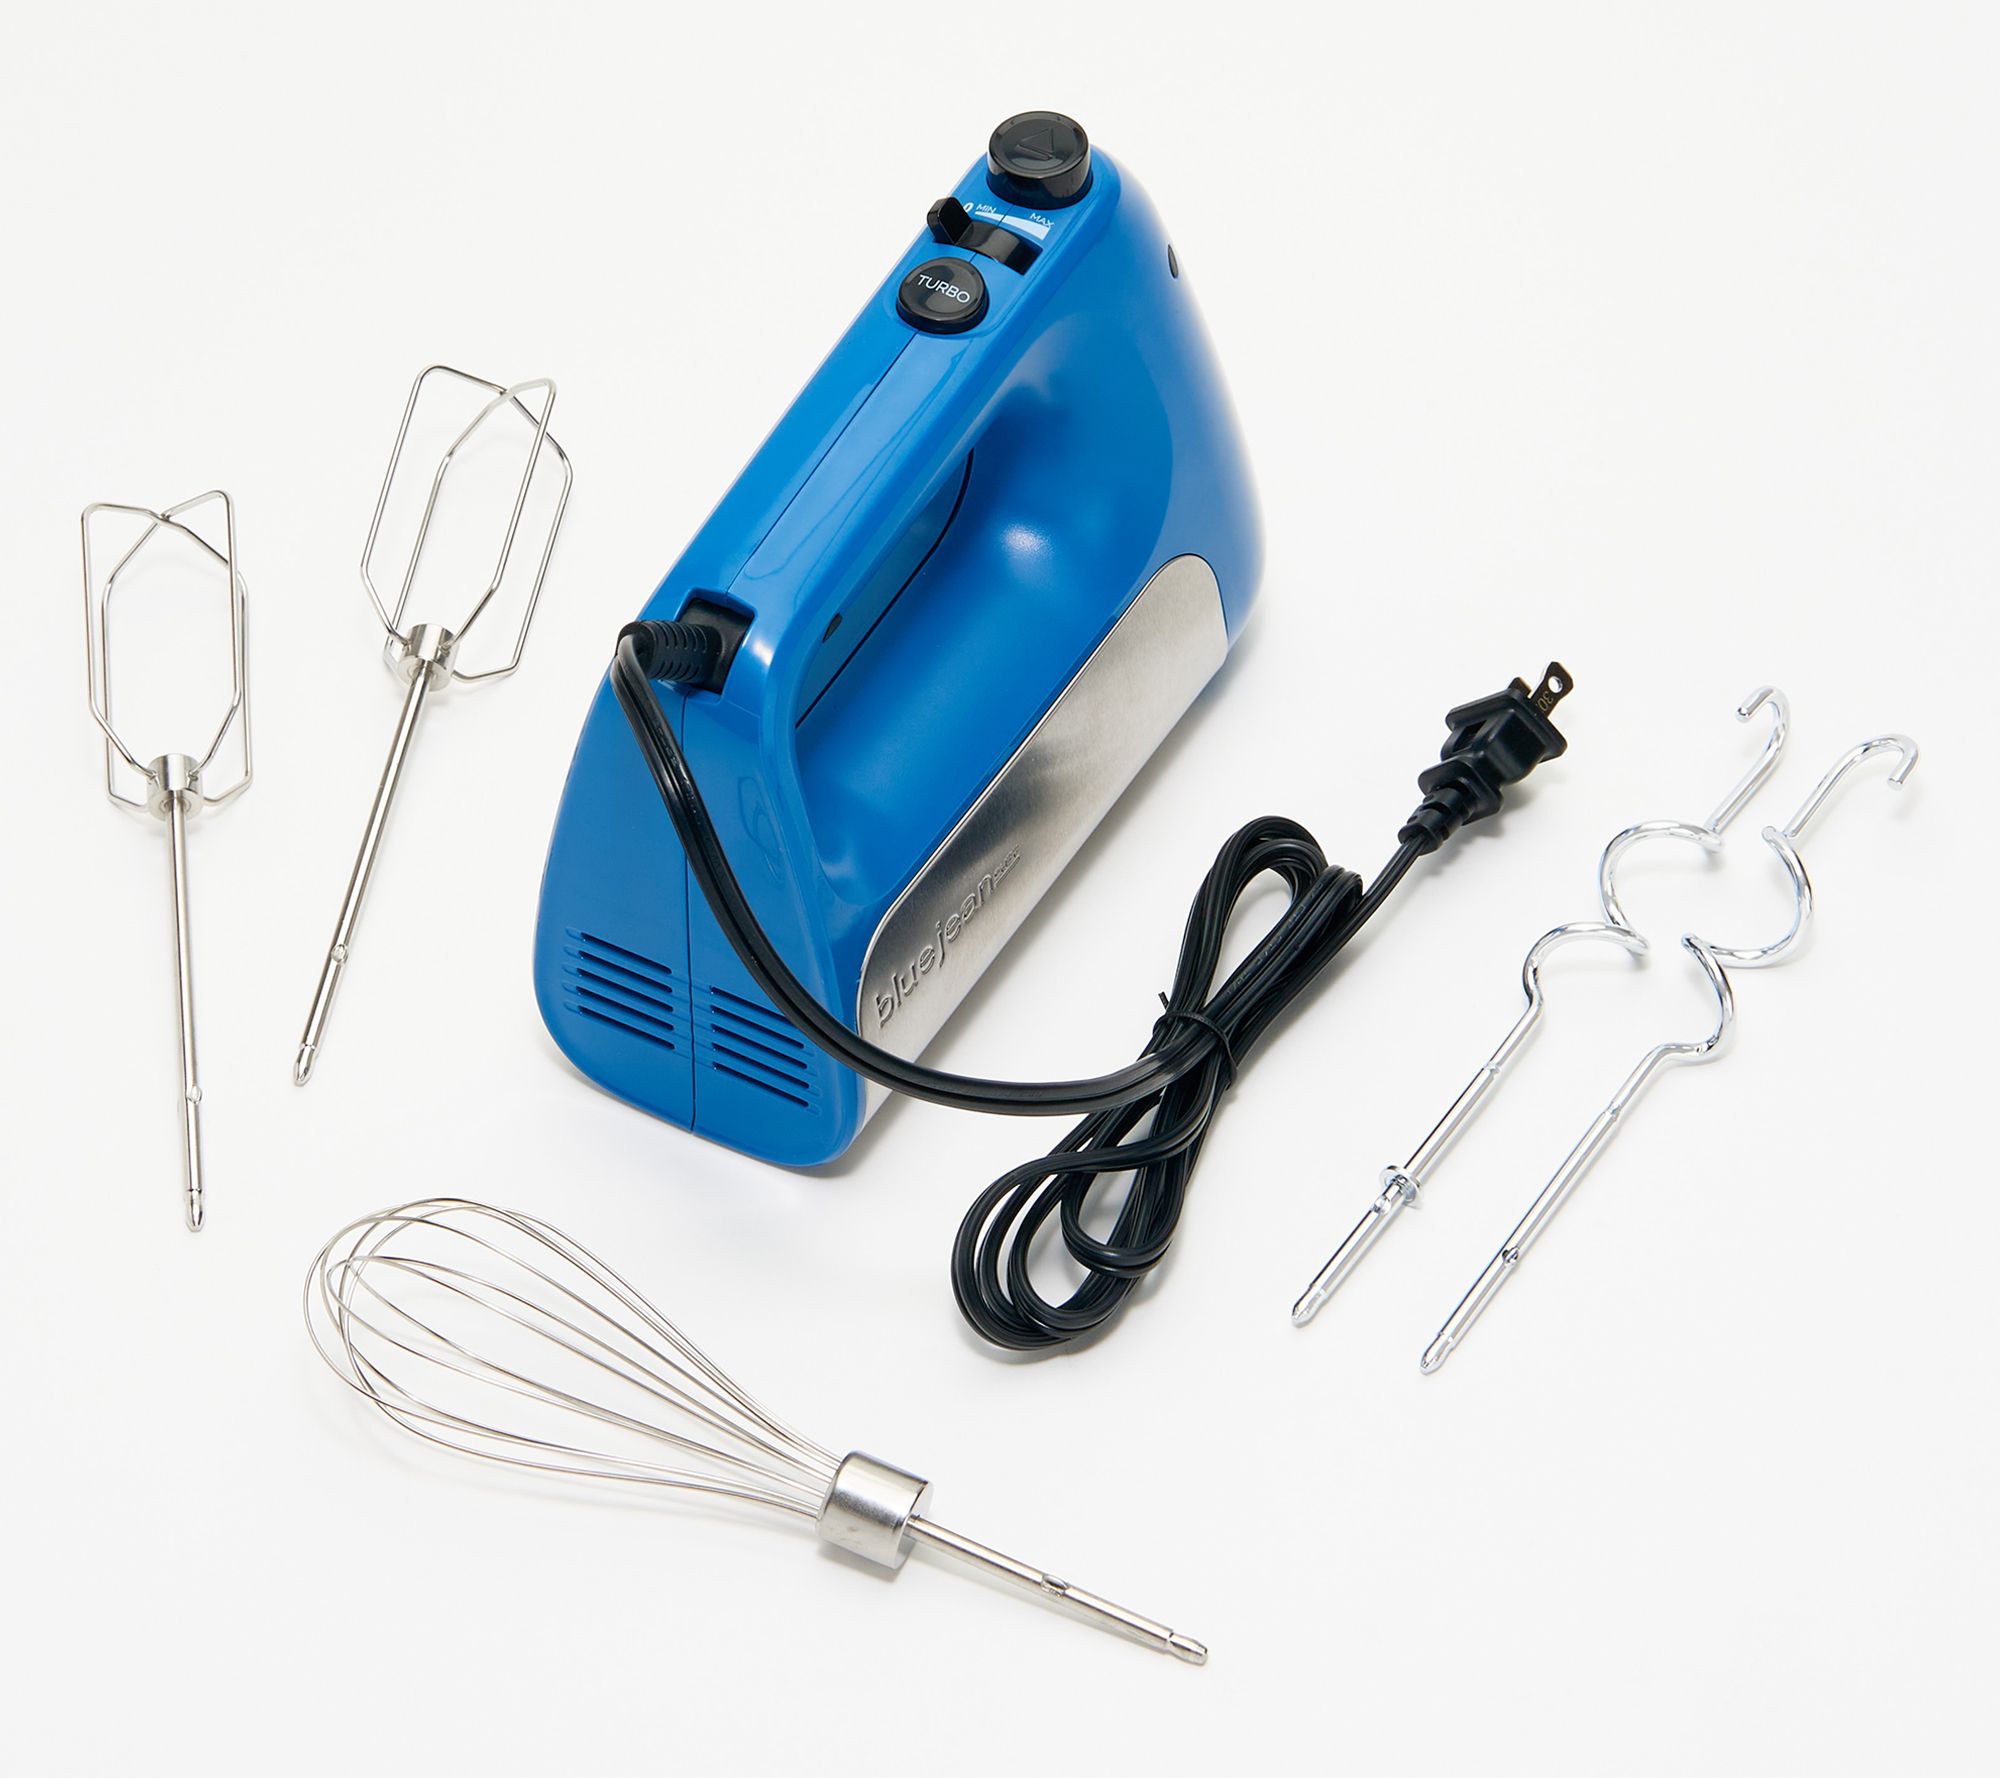 Magnolia Bakery 5 Speed Hand Mixer 62601, Color: Blue - JCPenney